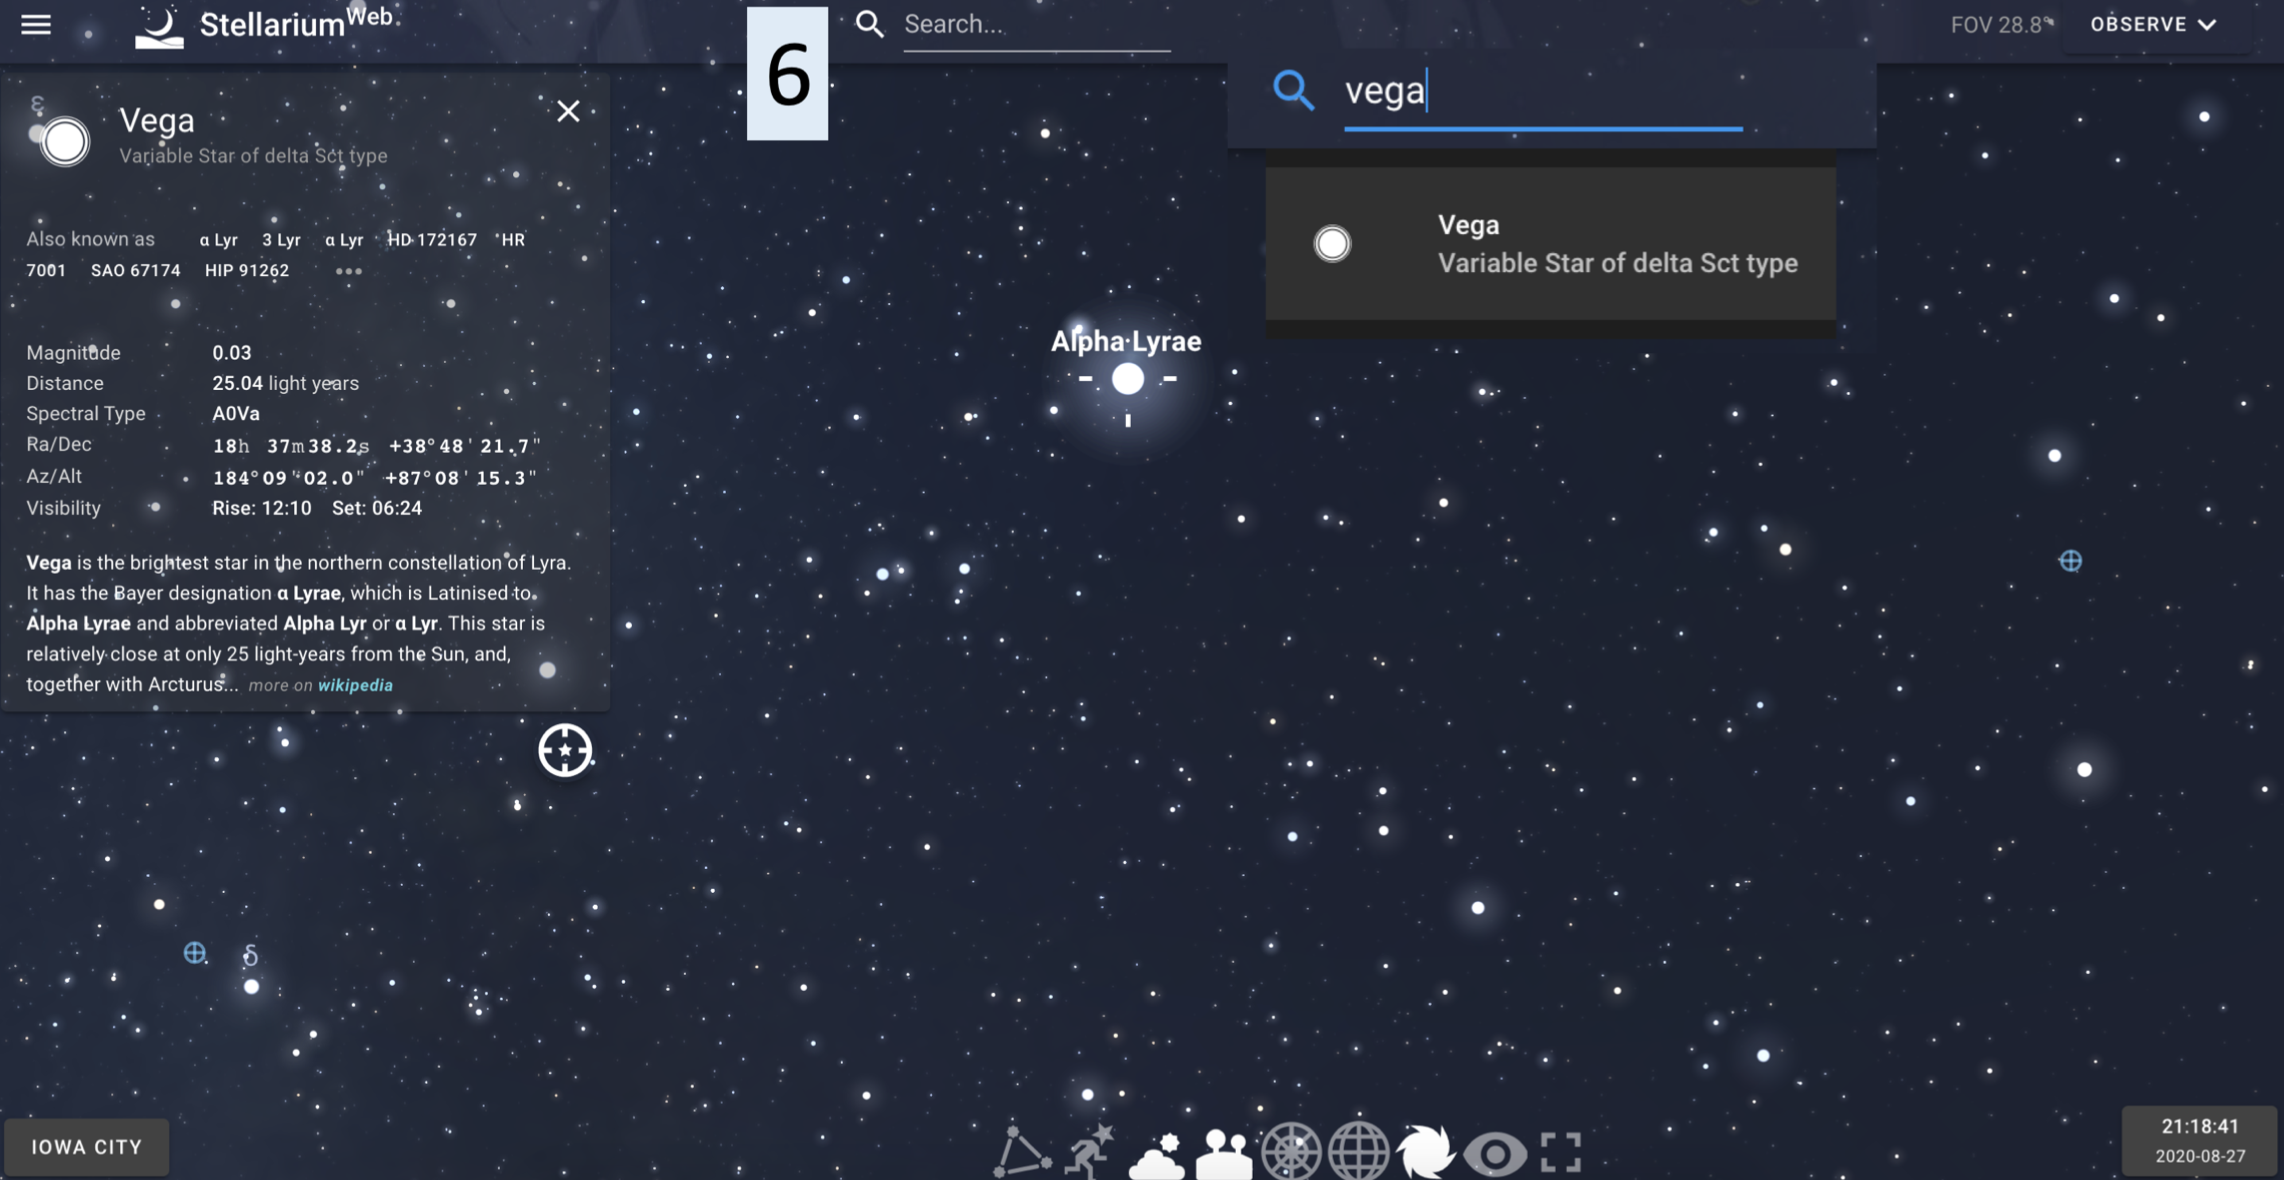 A digital view of the night sky is shown, with the view zoomed in on the sky to center on the star Vega. A menu is included.